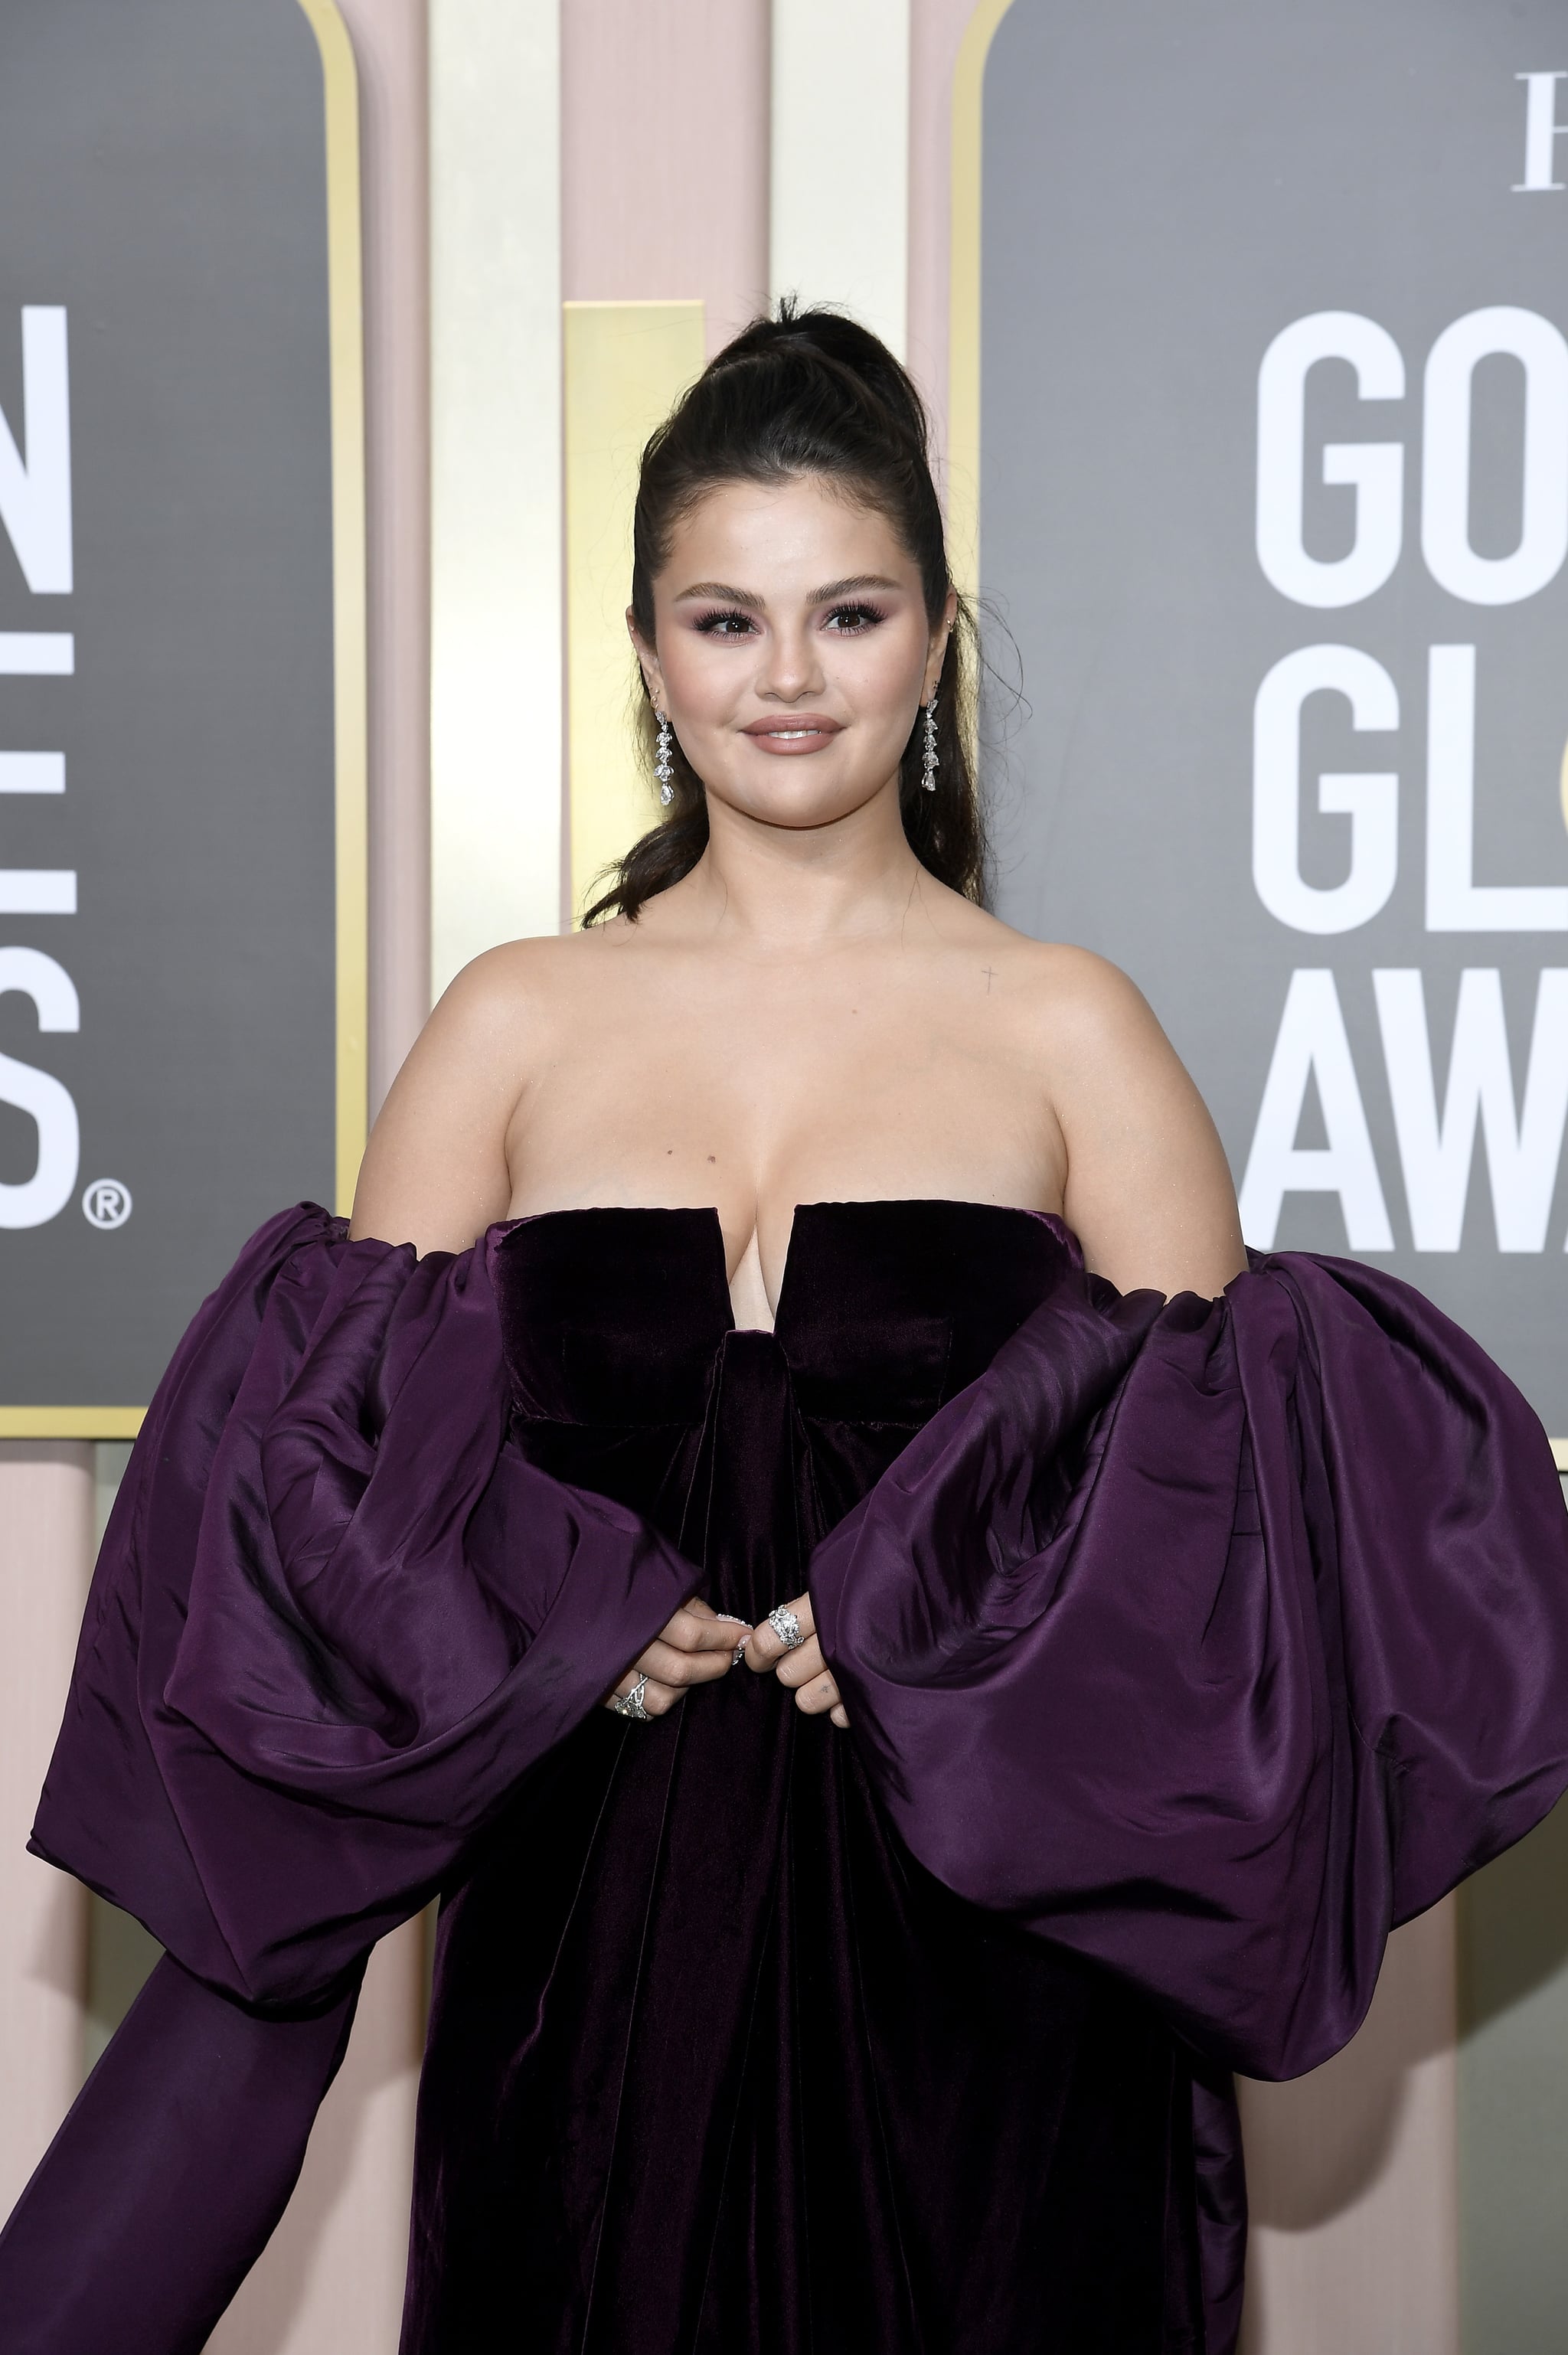 Selena Gomez Is the First Woman to Have 400 Million Followers on Instagram